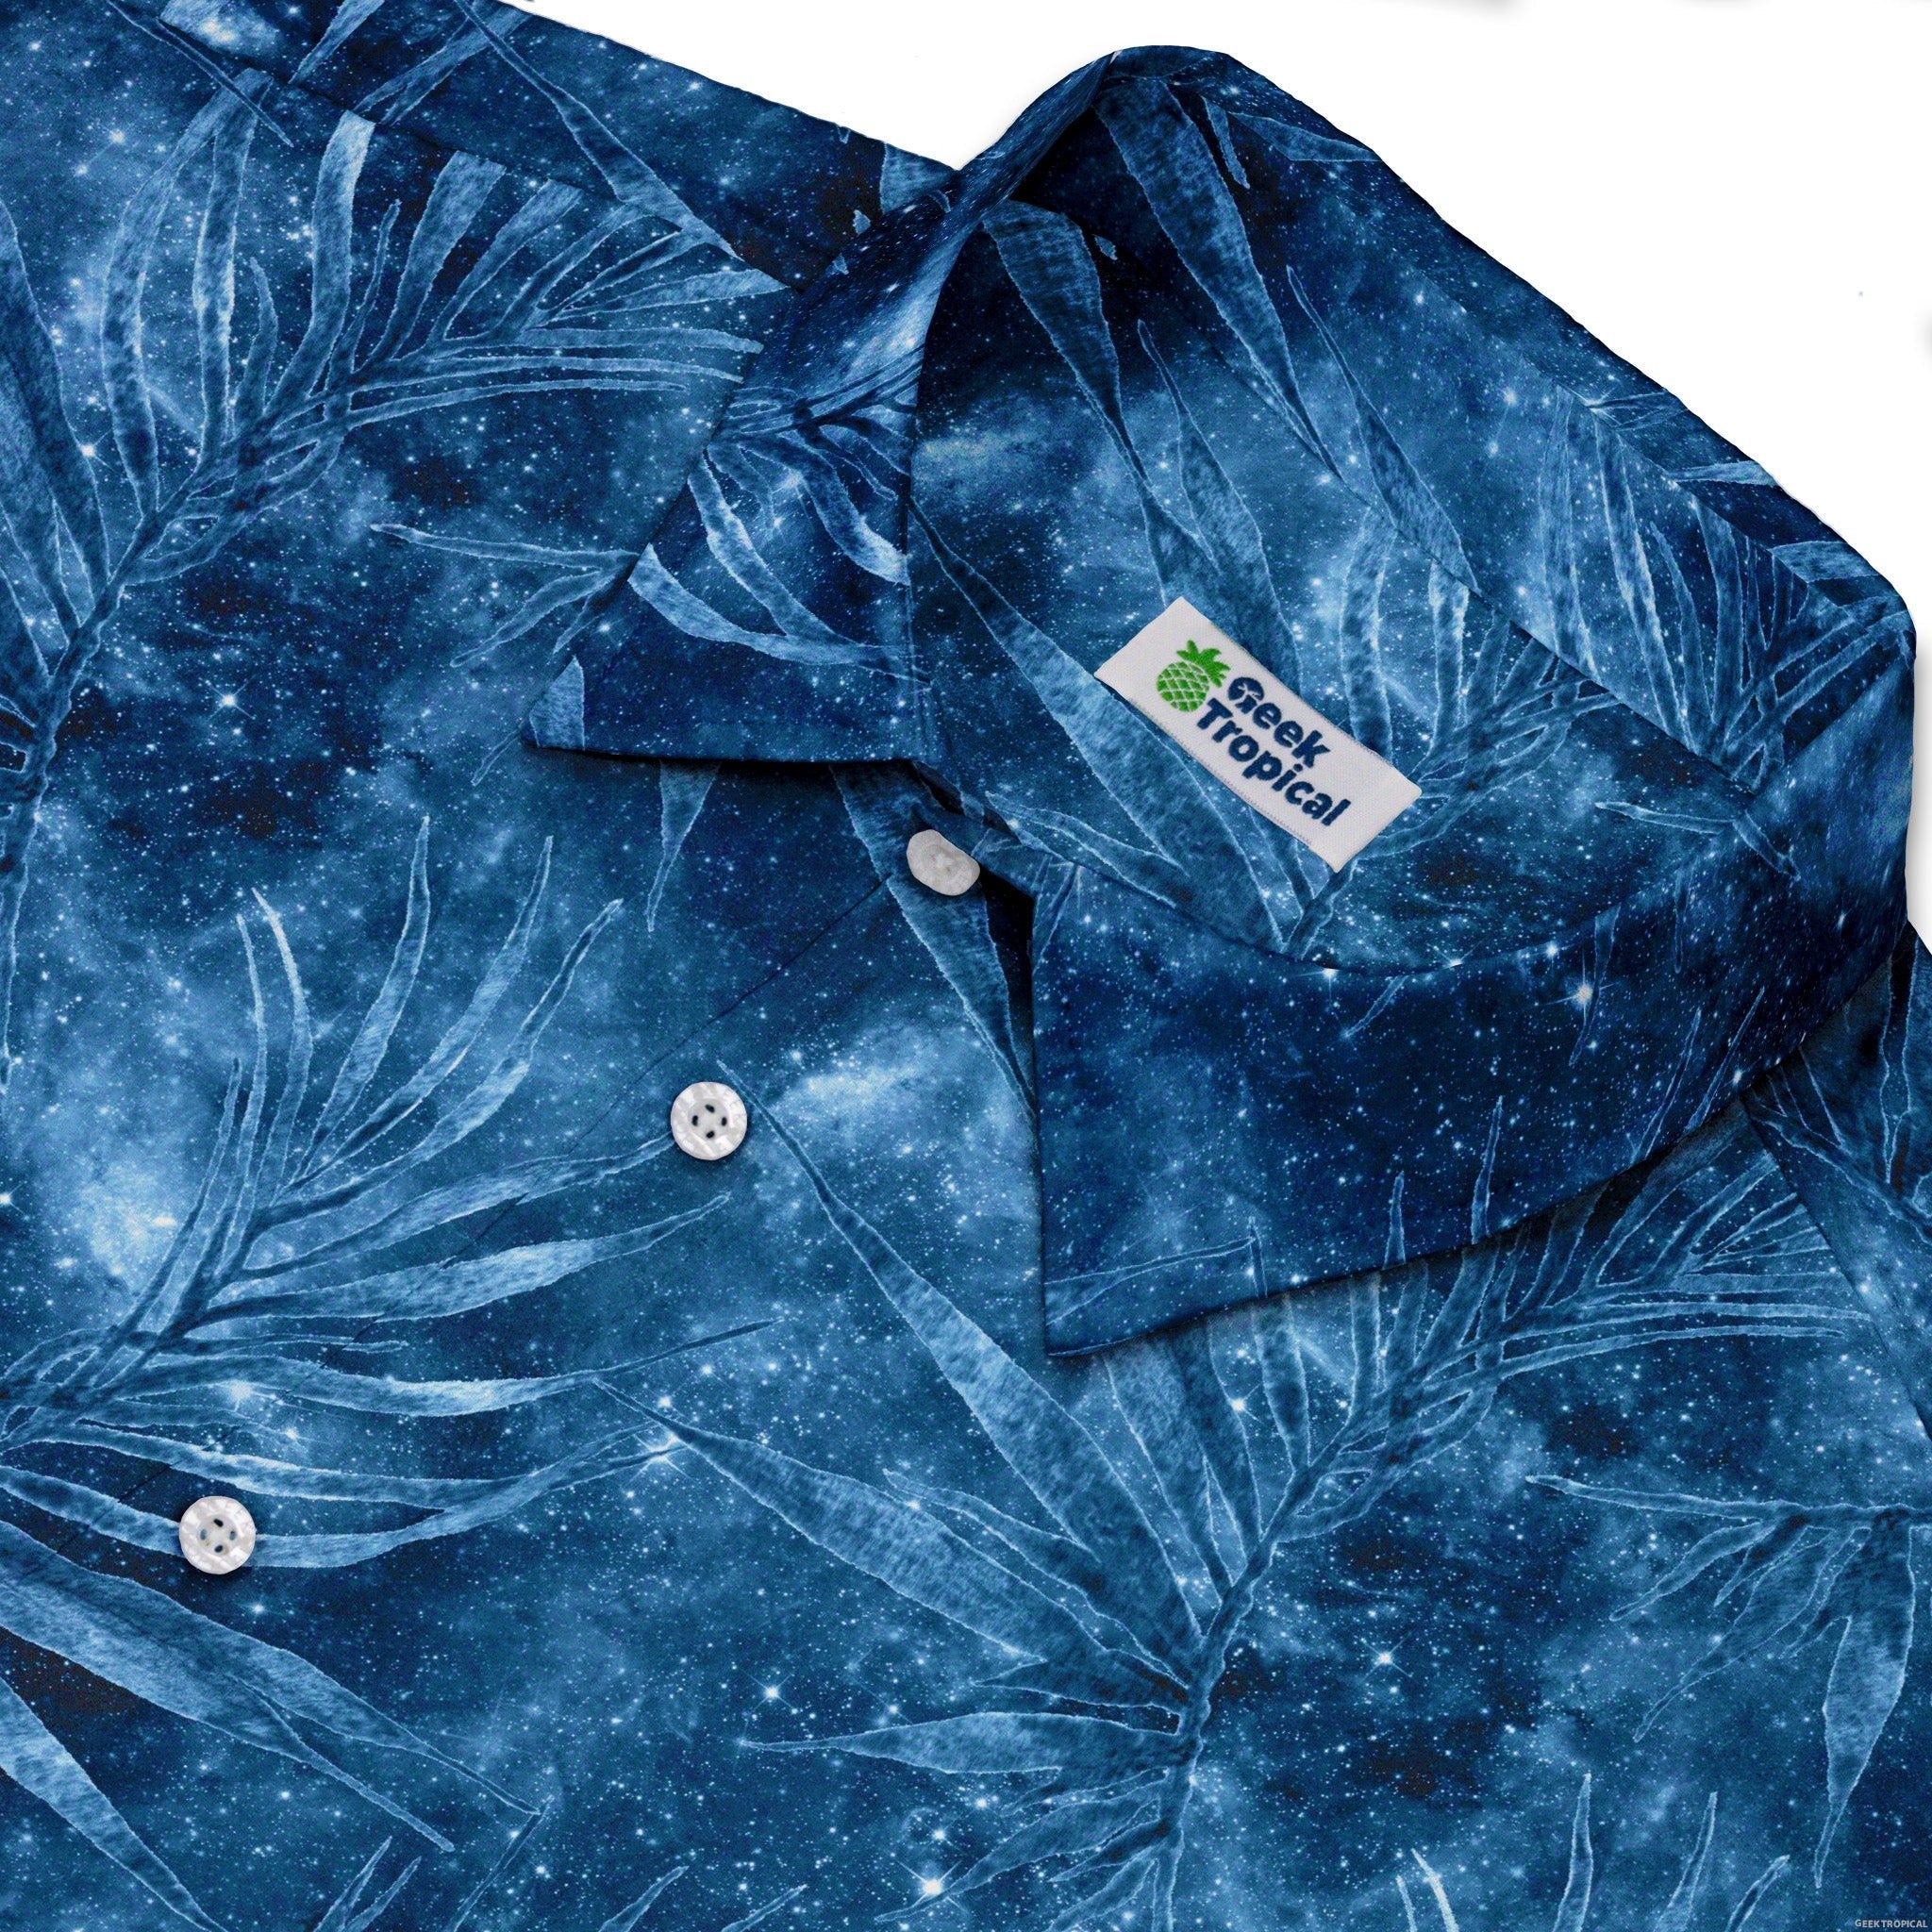 Blue Grey Hawaiian Space Button Up Shirt - adult sizing - outer space & astronaut print - Tropical Hawaiian Patterns